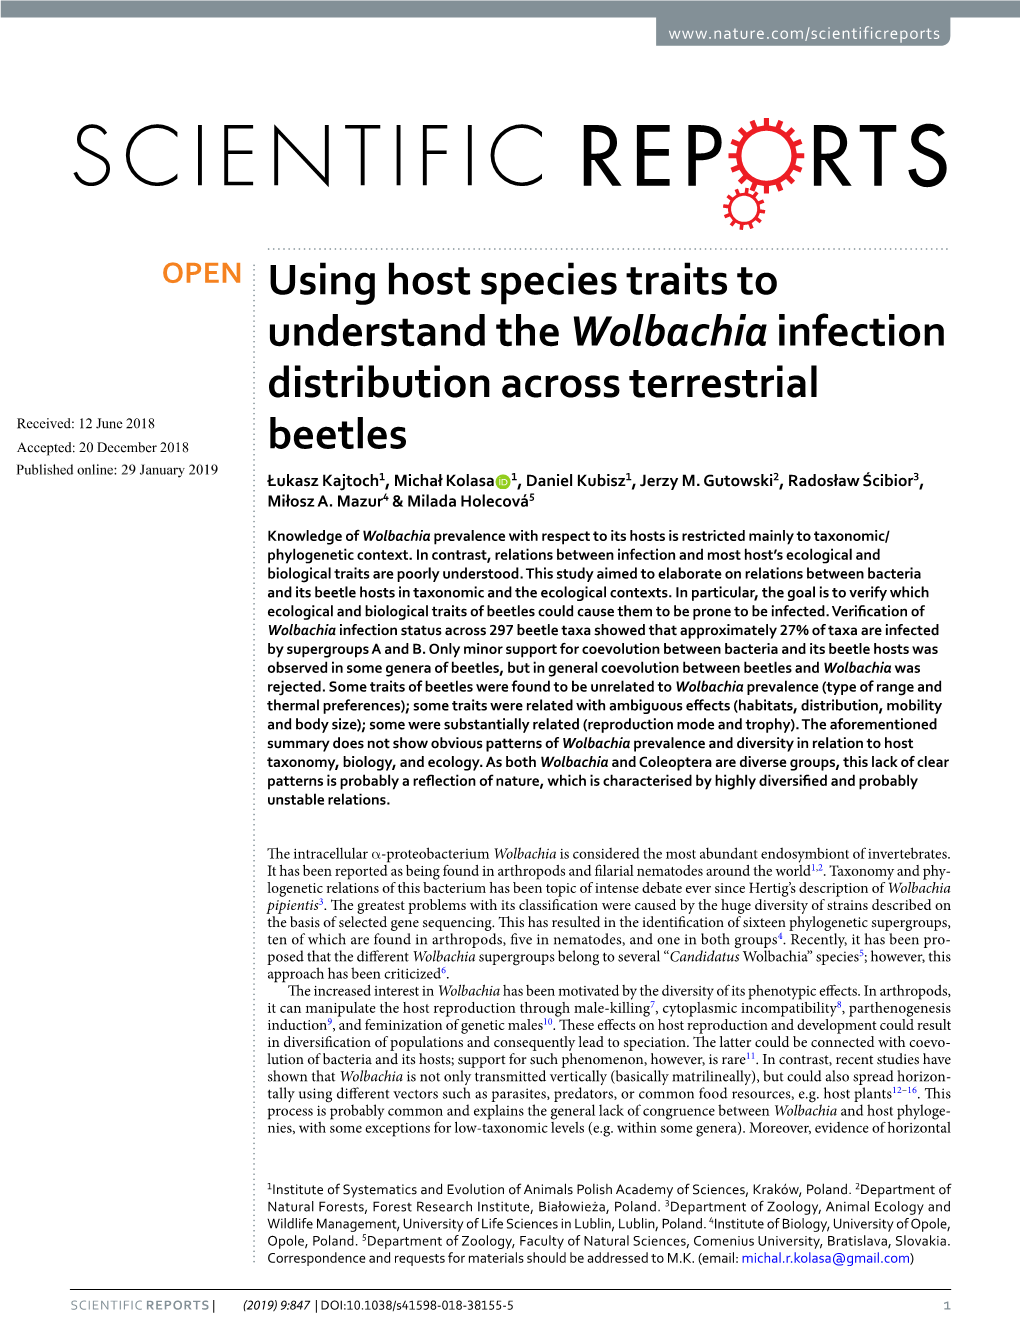 Using Host Species Traits to Understand the Wolbachia Infection